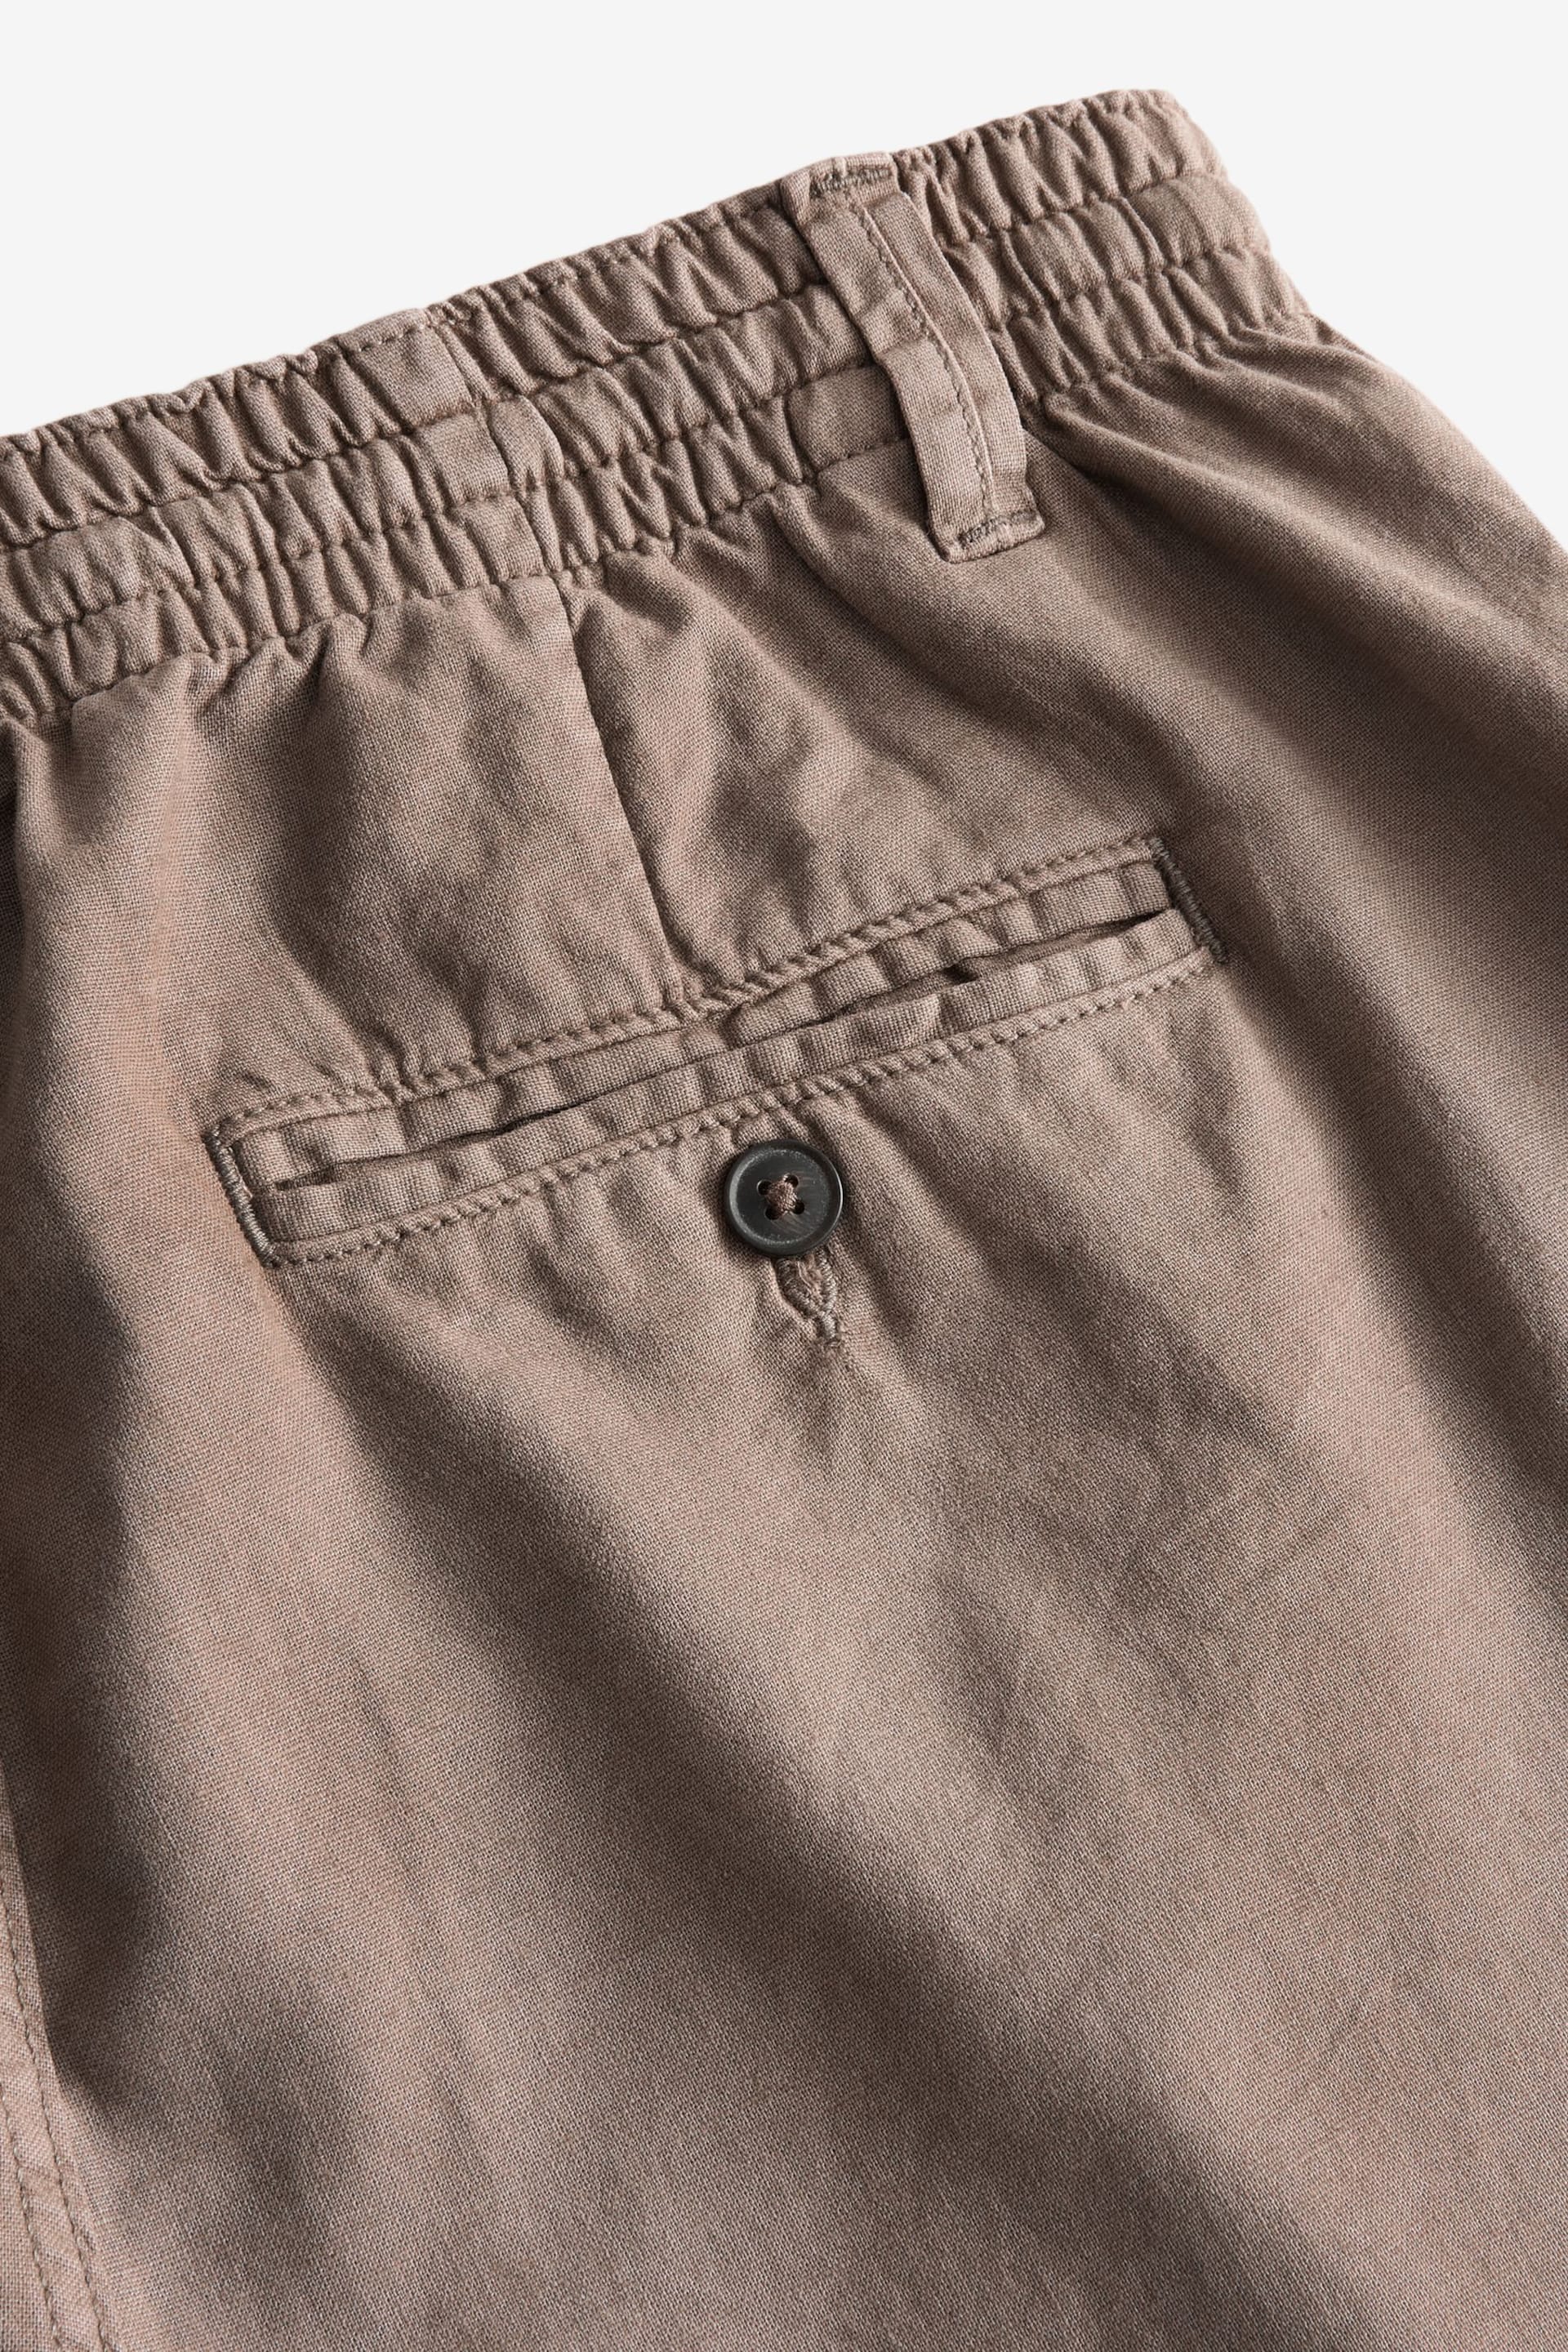 Brown Linen Blend Chino Shorts - Image 4 of 4